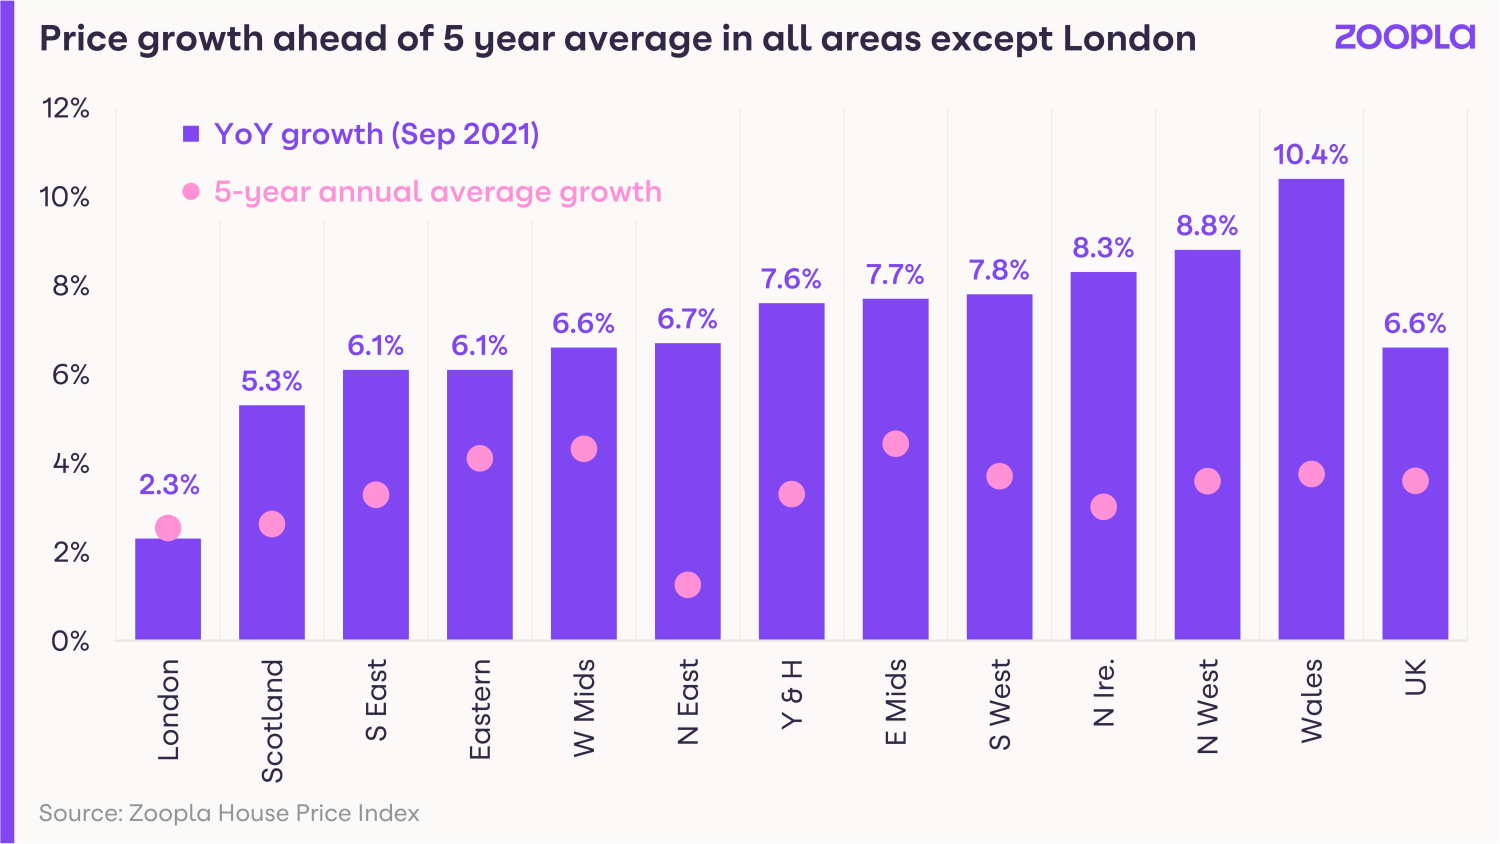 Price growth running ahead of five year average in all areas except London